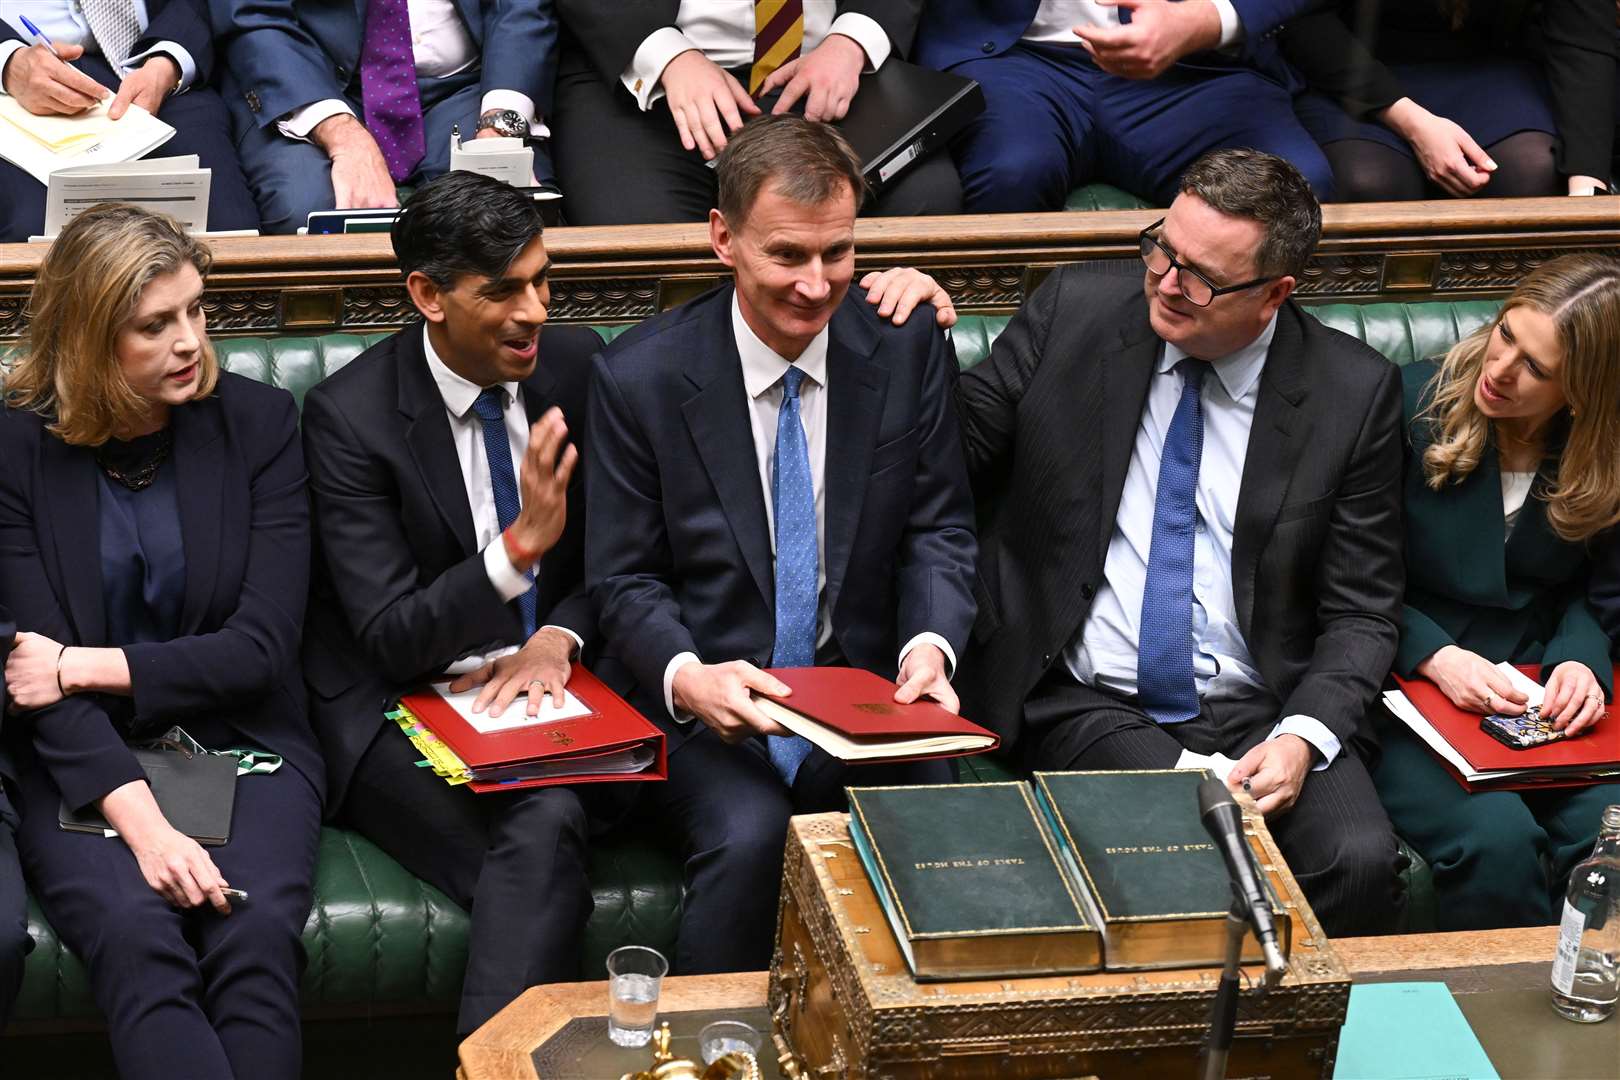 Jeremy Hunt gave a positive assessment of the UK economy and public finances as he announced two large tax cuts in his autumn statement (UK Parliament/Jessica Taylor/PA)